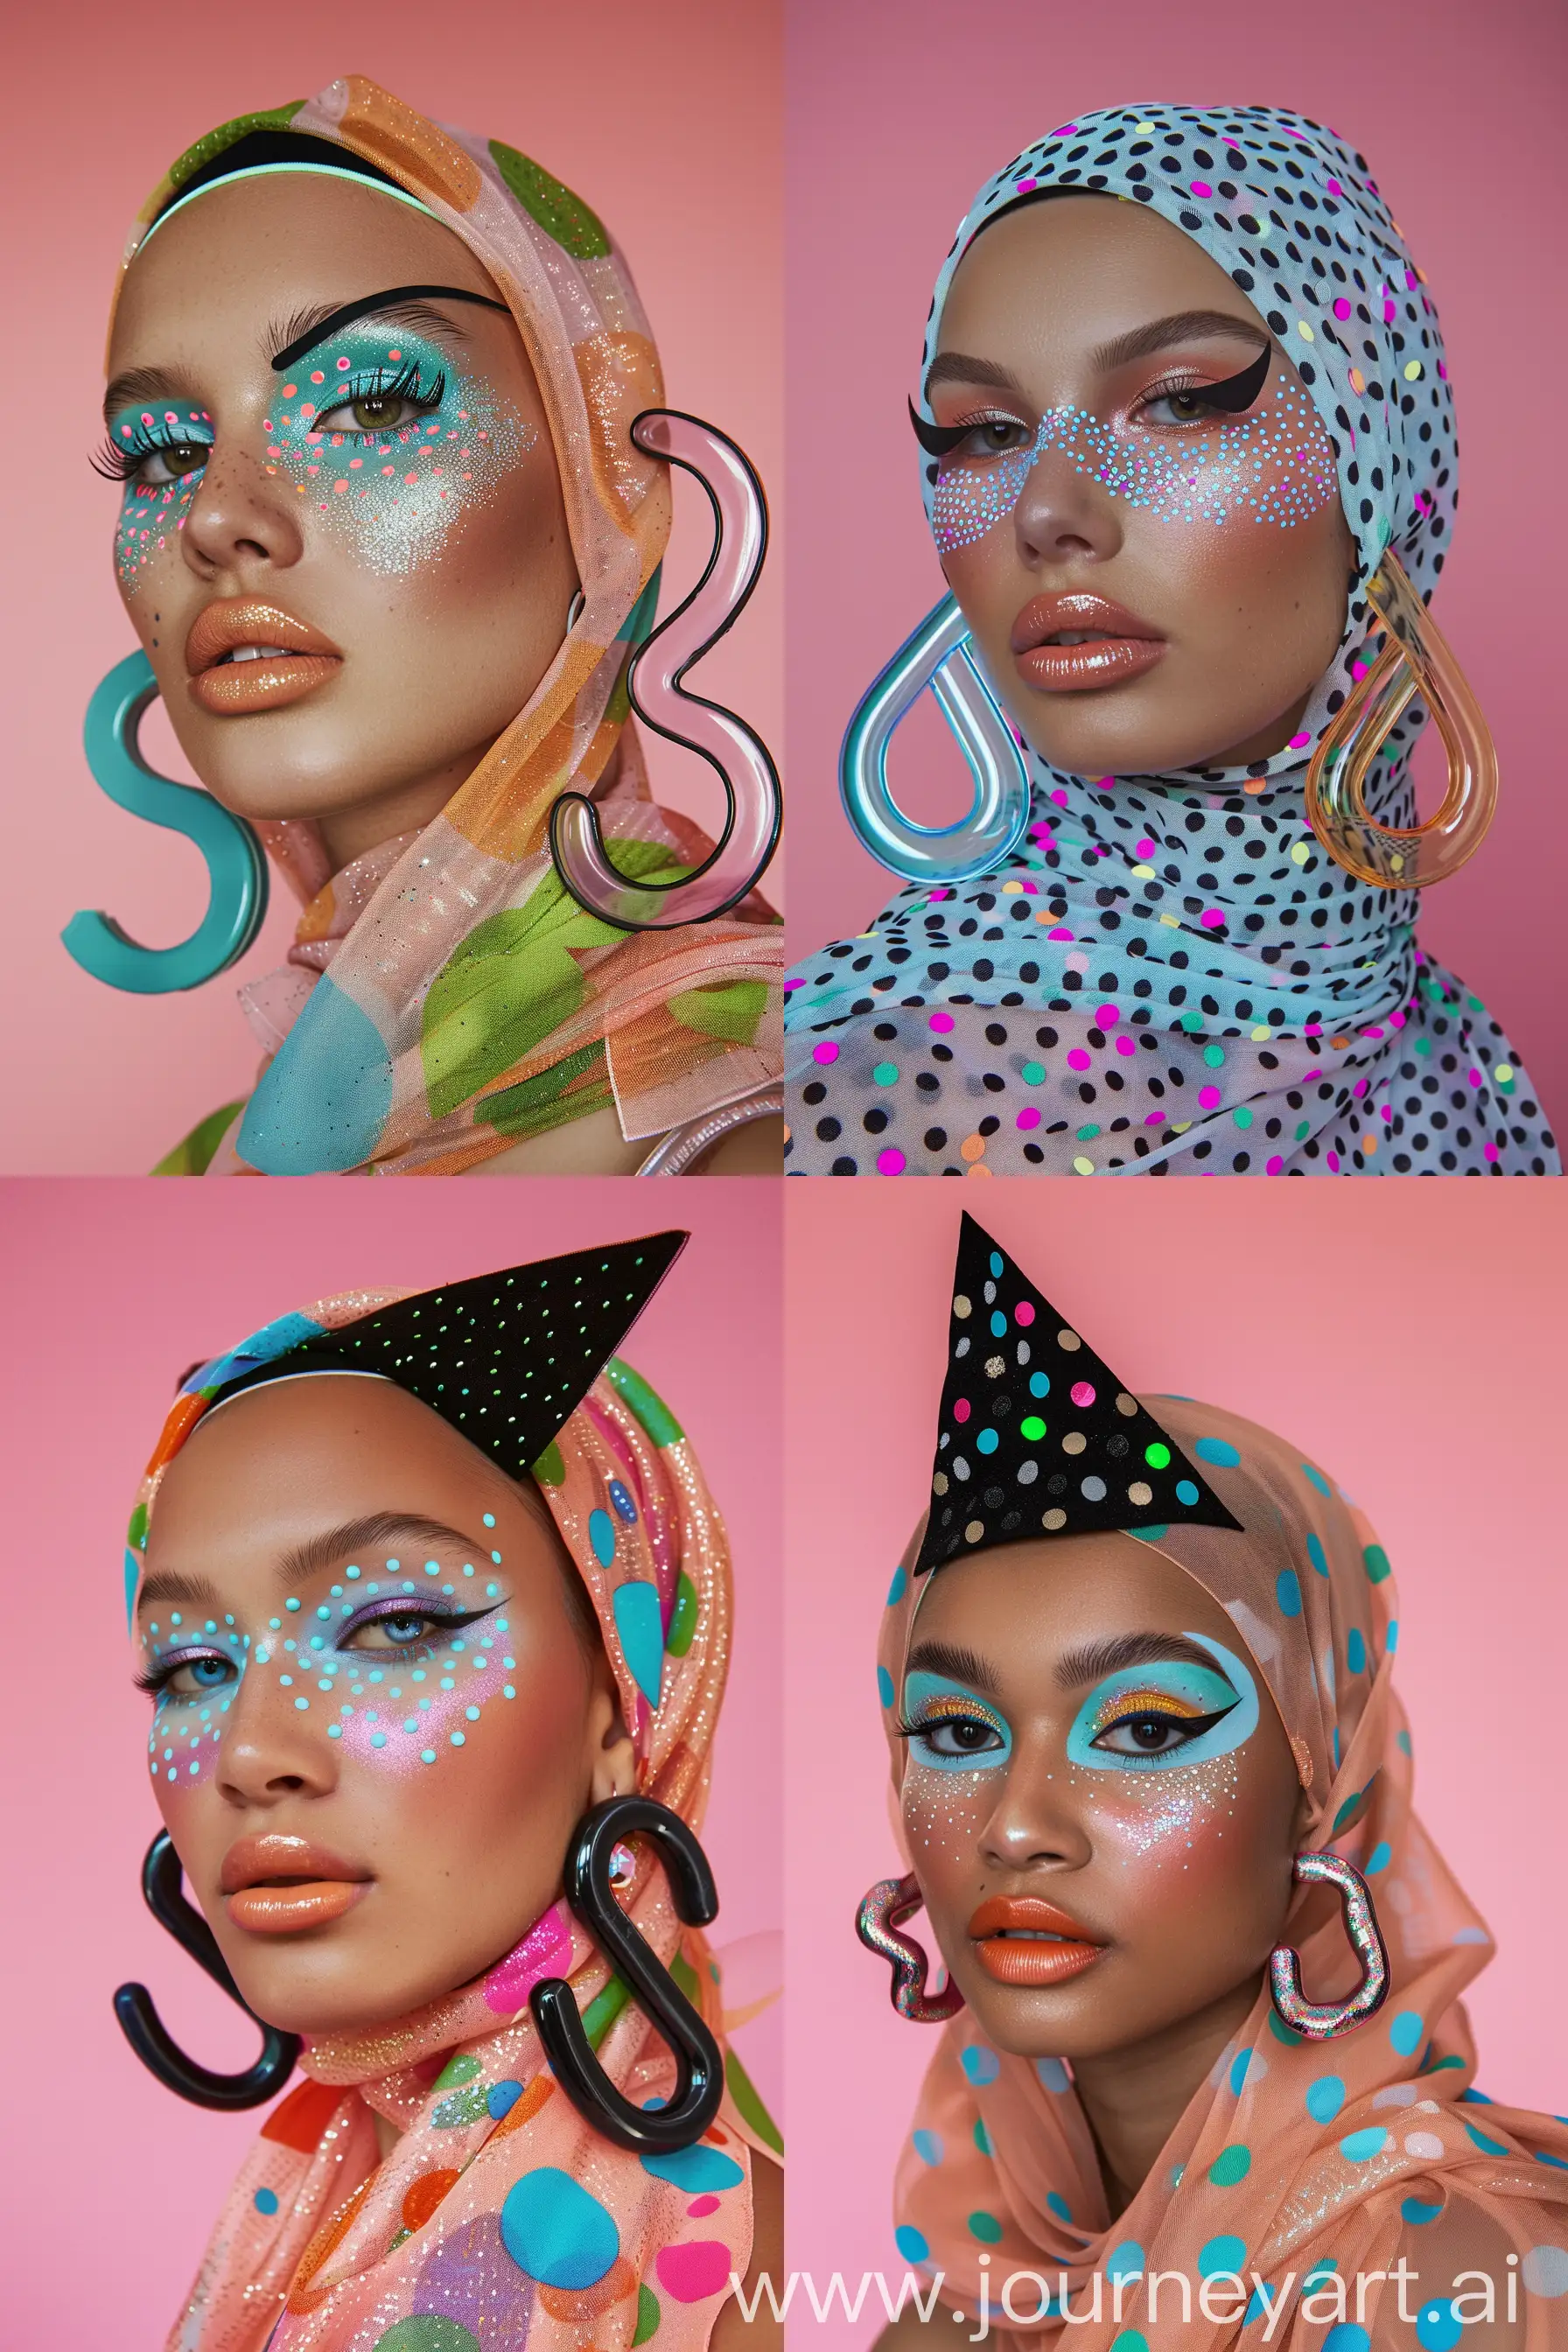 Vibrant-Hijabi-Model-with-Neon-Makeup-and-Statement-Earrings-on-Pink-Background